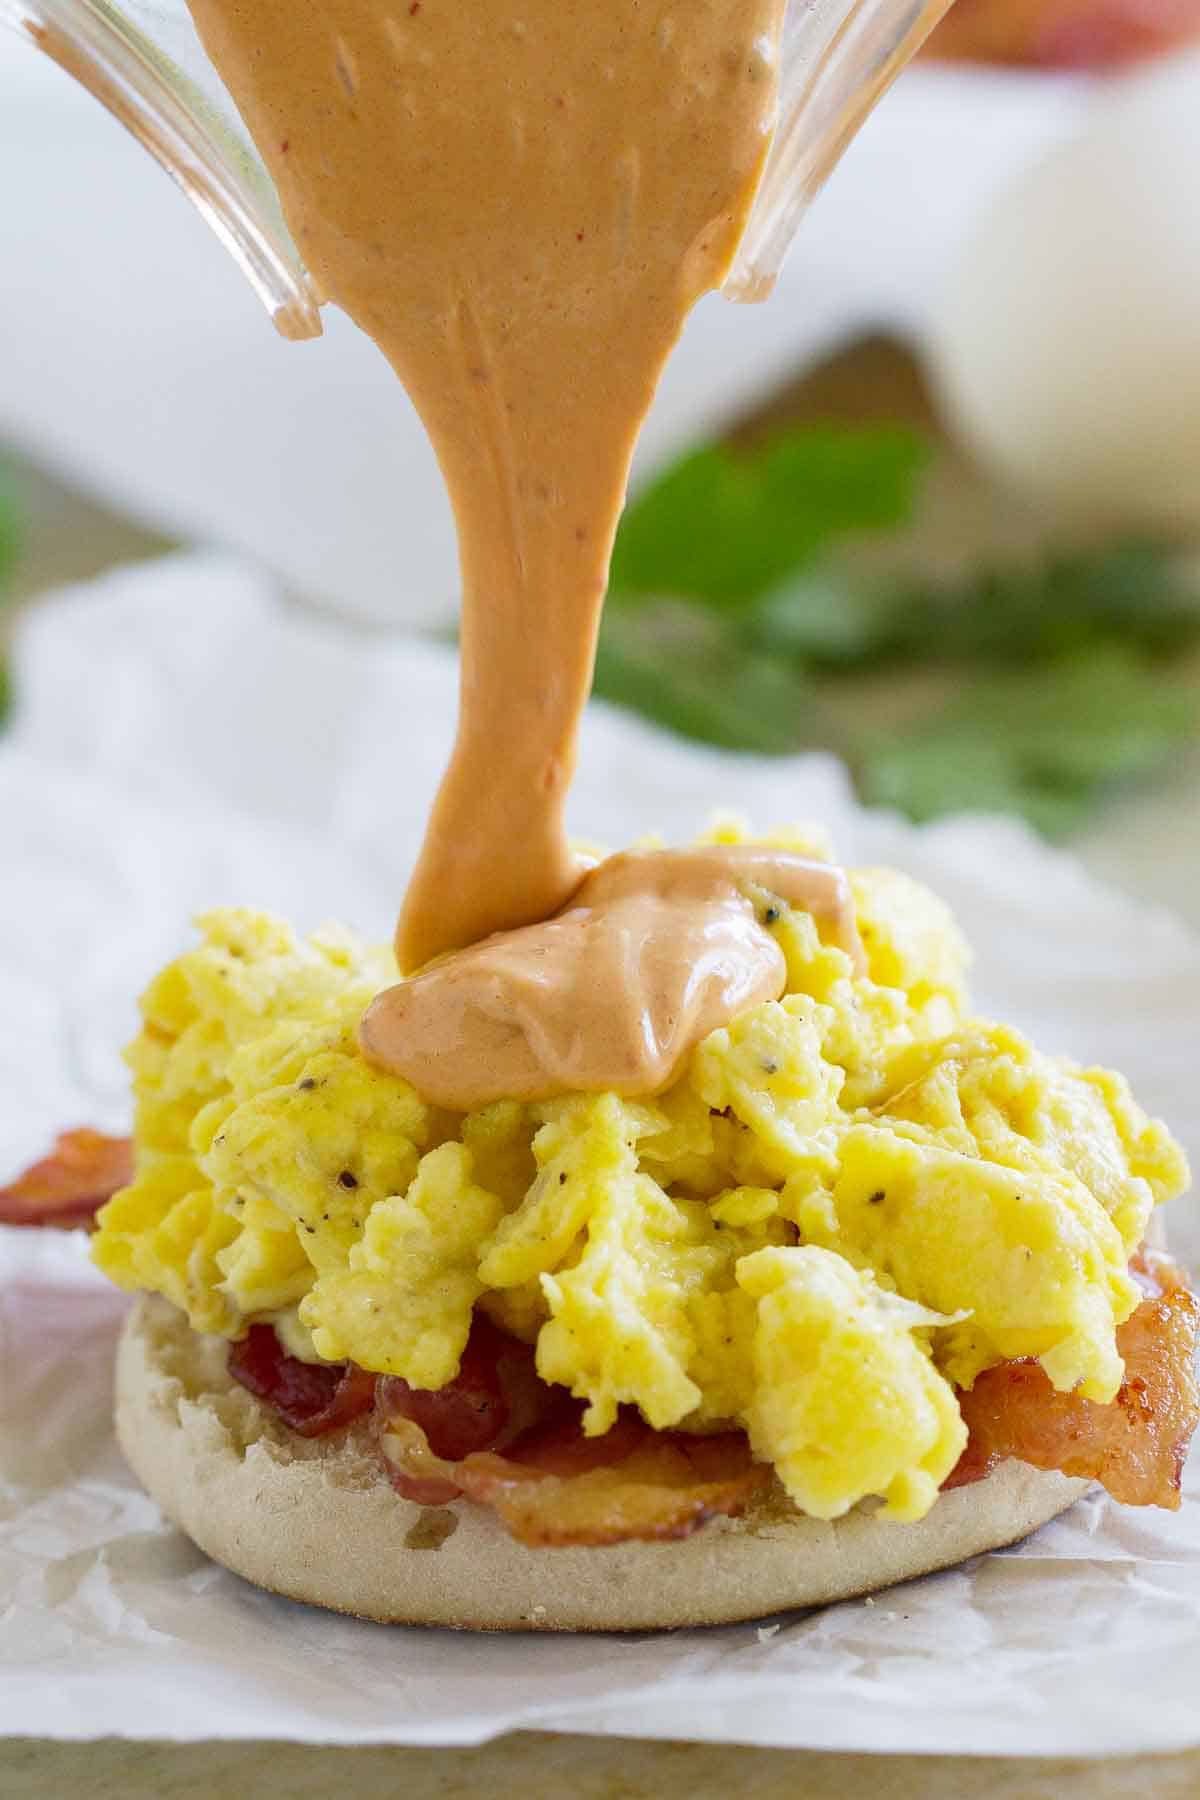 Pouring chipotle hollandaise sauce on top of egg sandwich